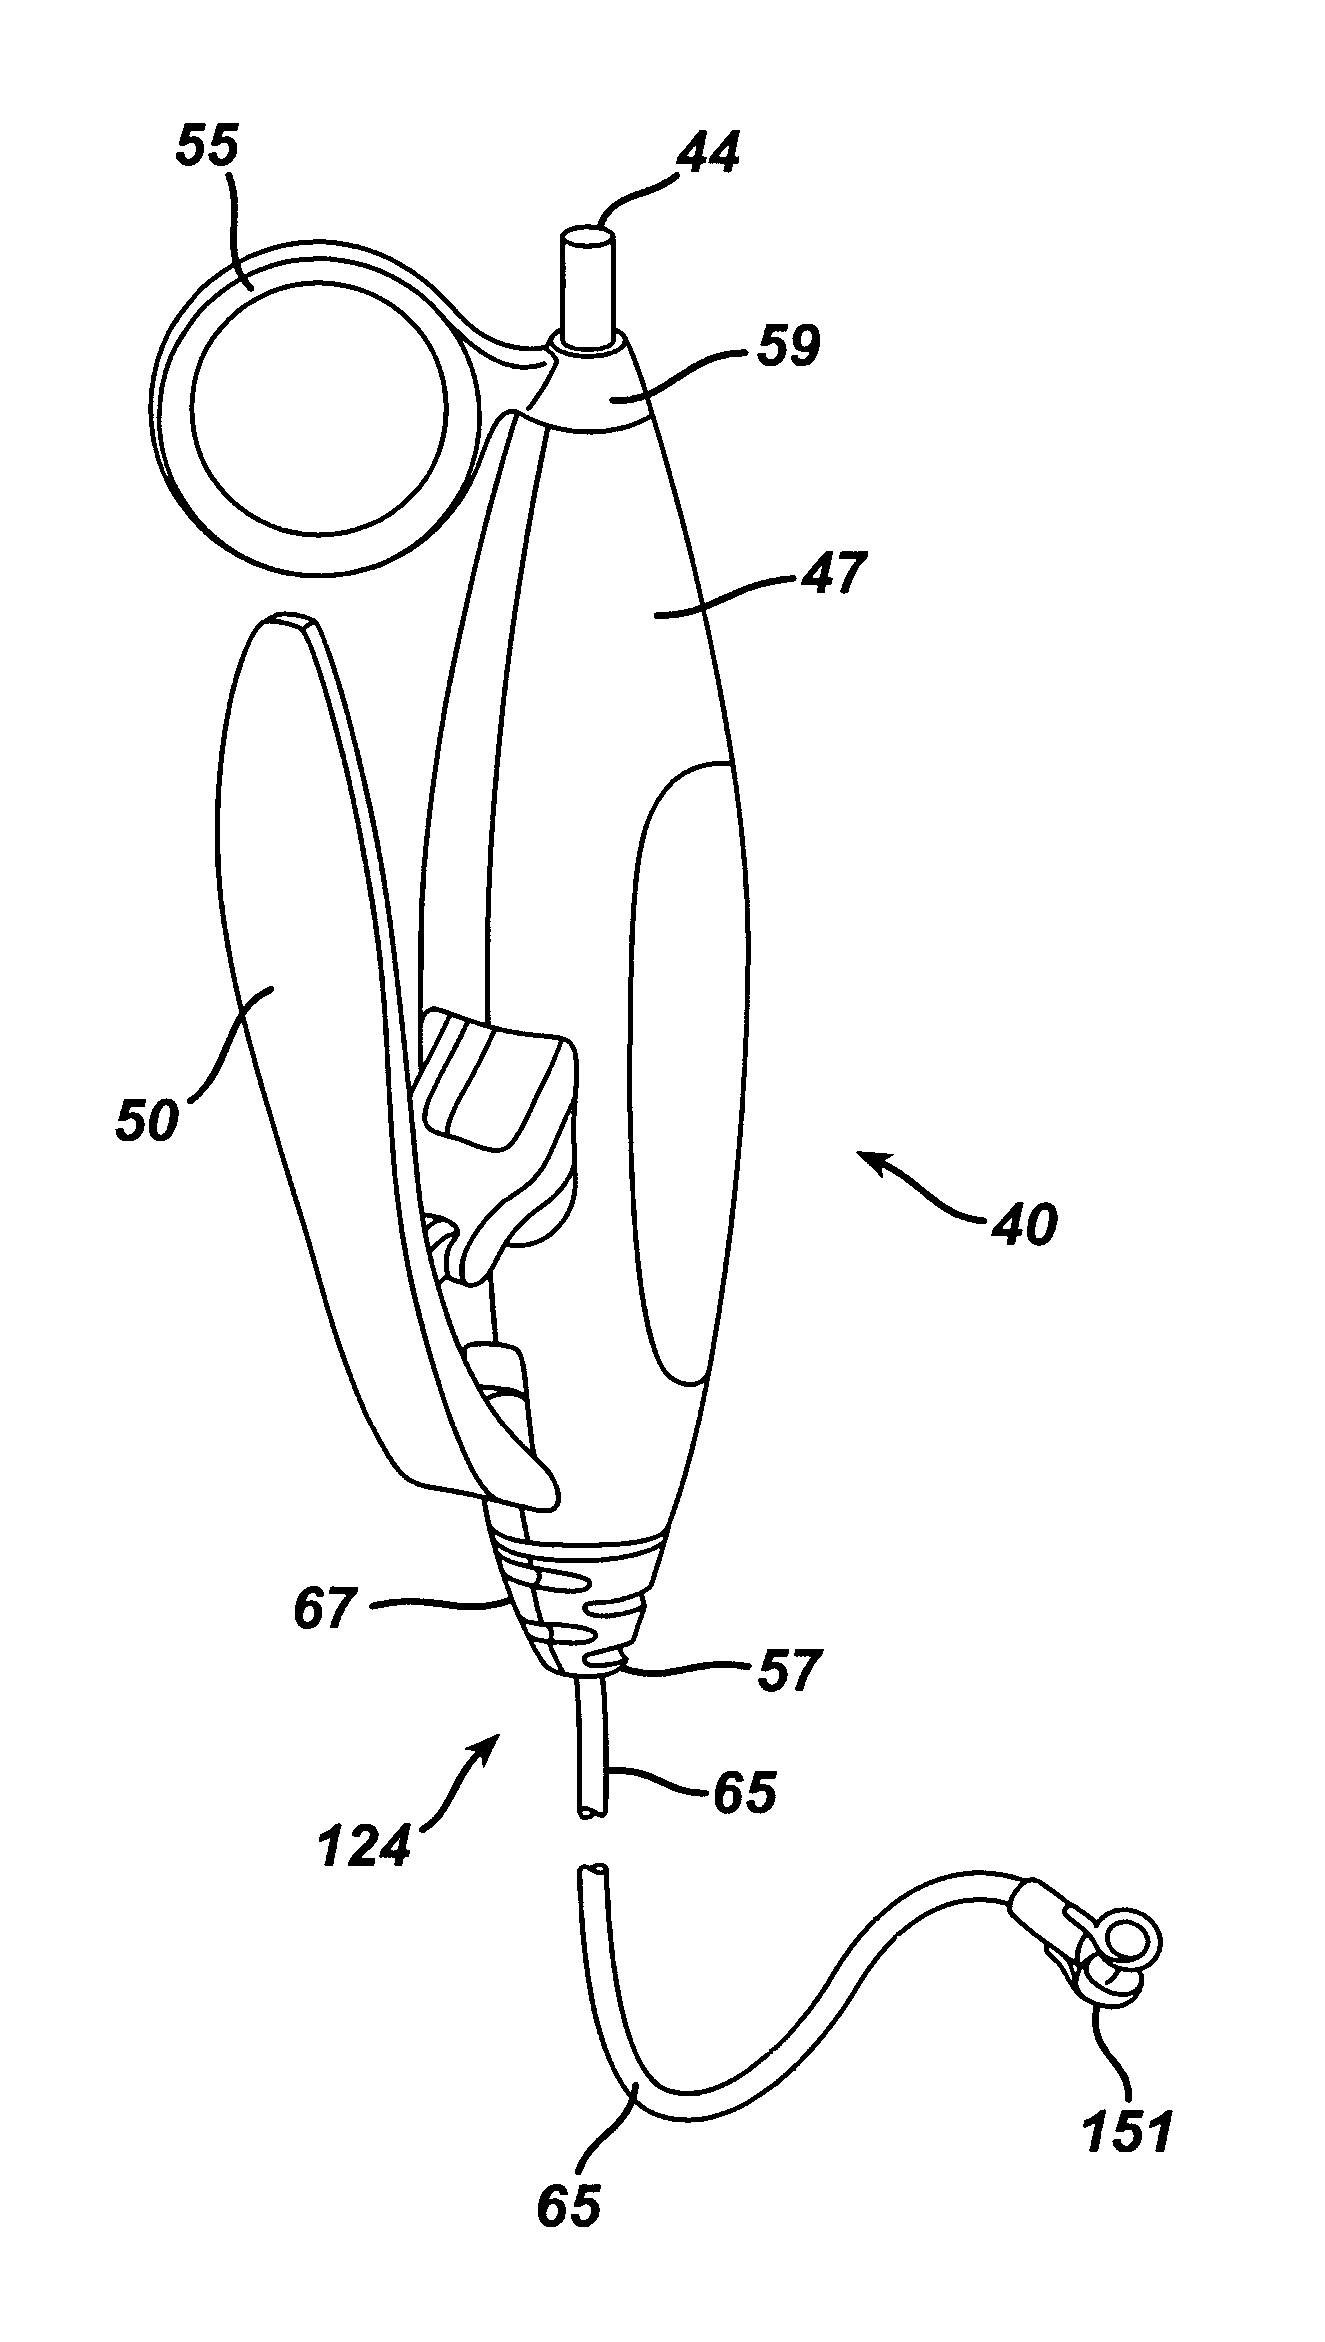 Method of operating an endoscopic device with one hand